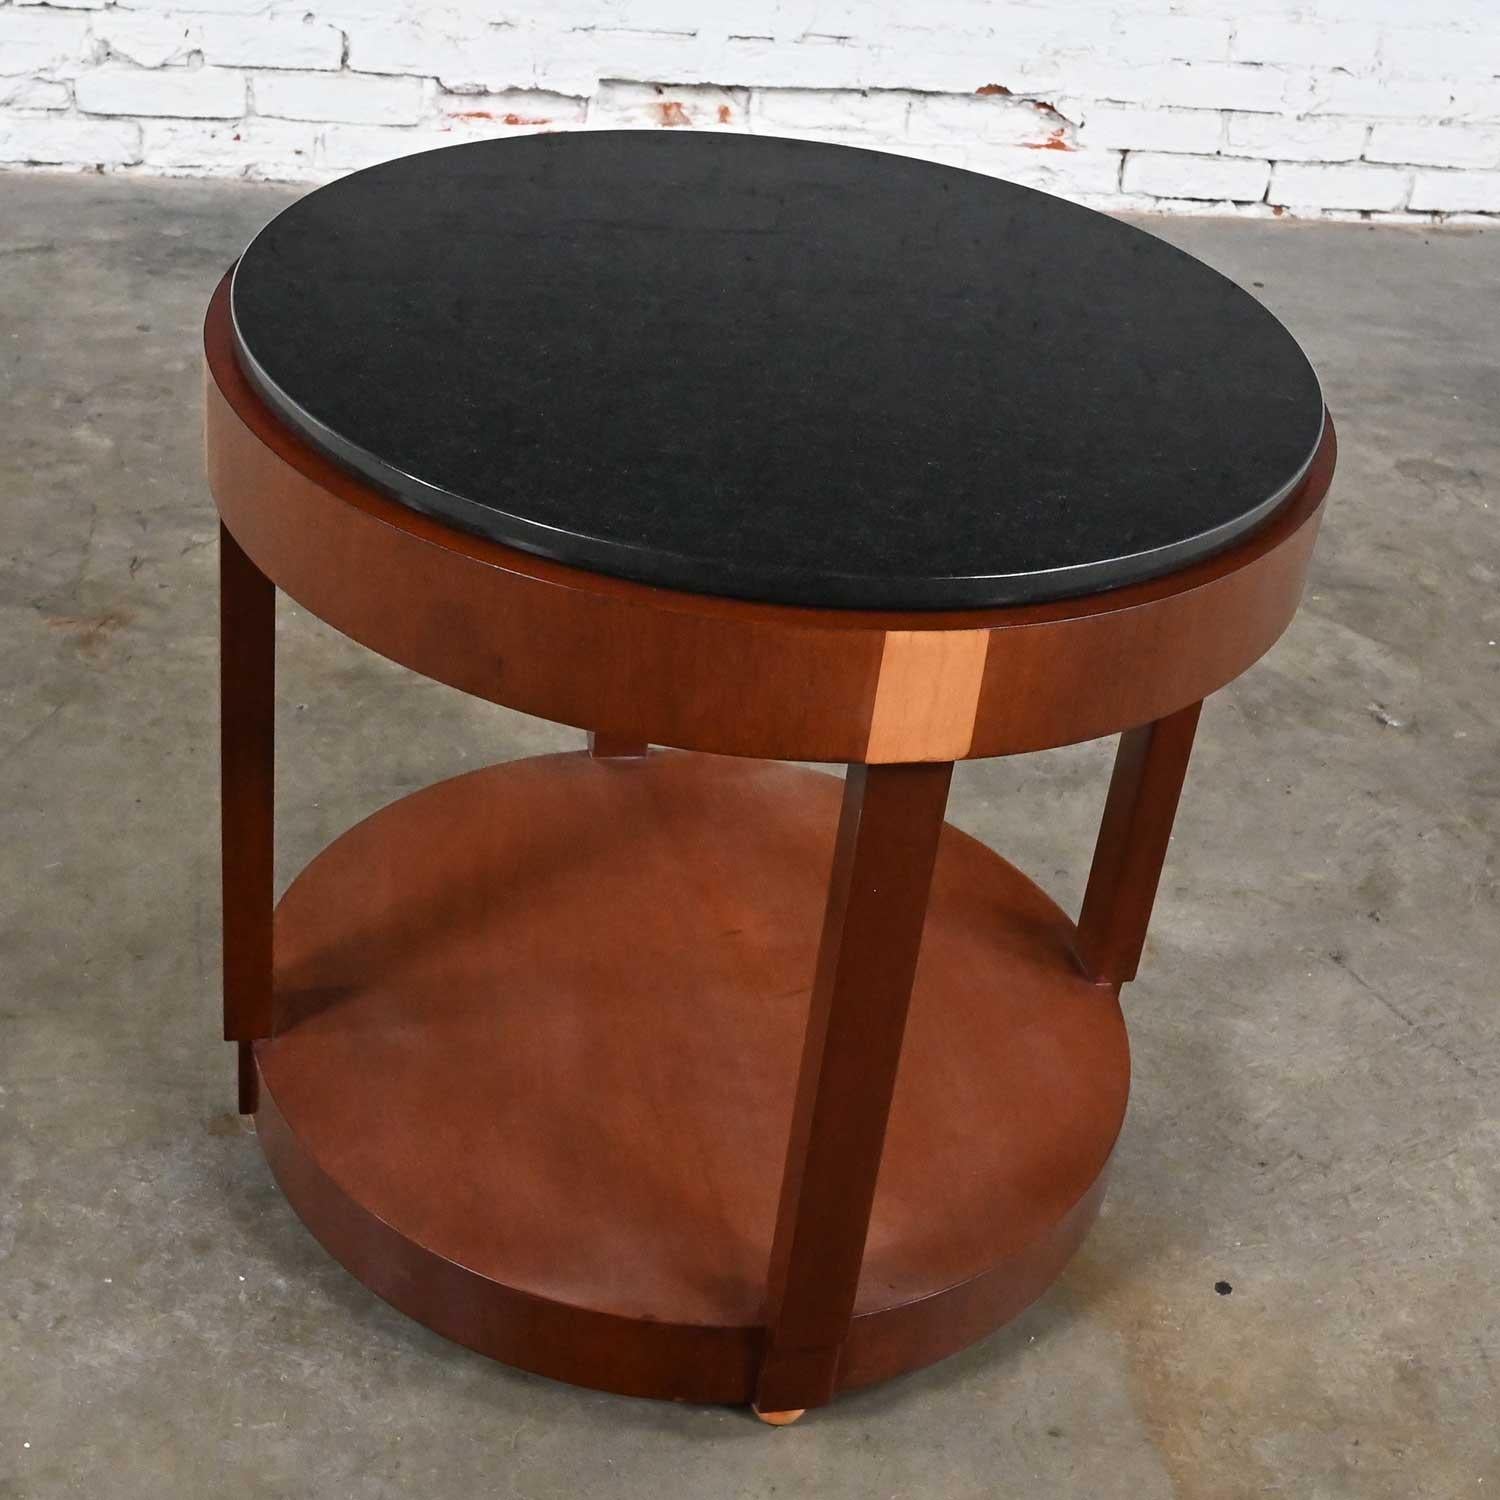 20th Century Art Deco Revival Custom Two Toned Mahogany Round Side Table Black Granite Top For Sale